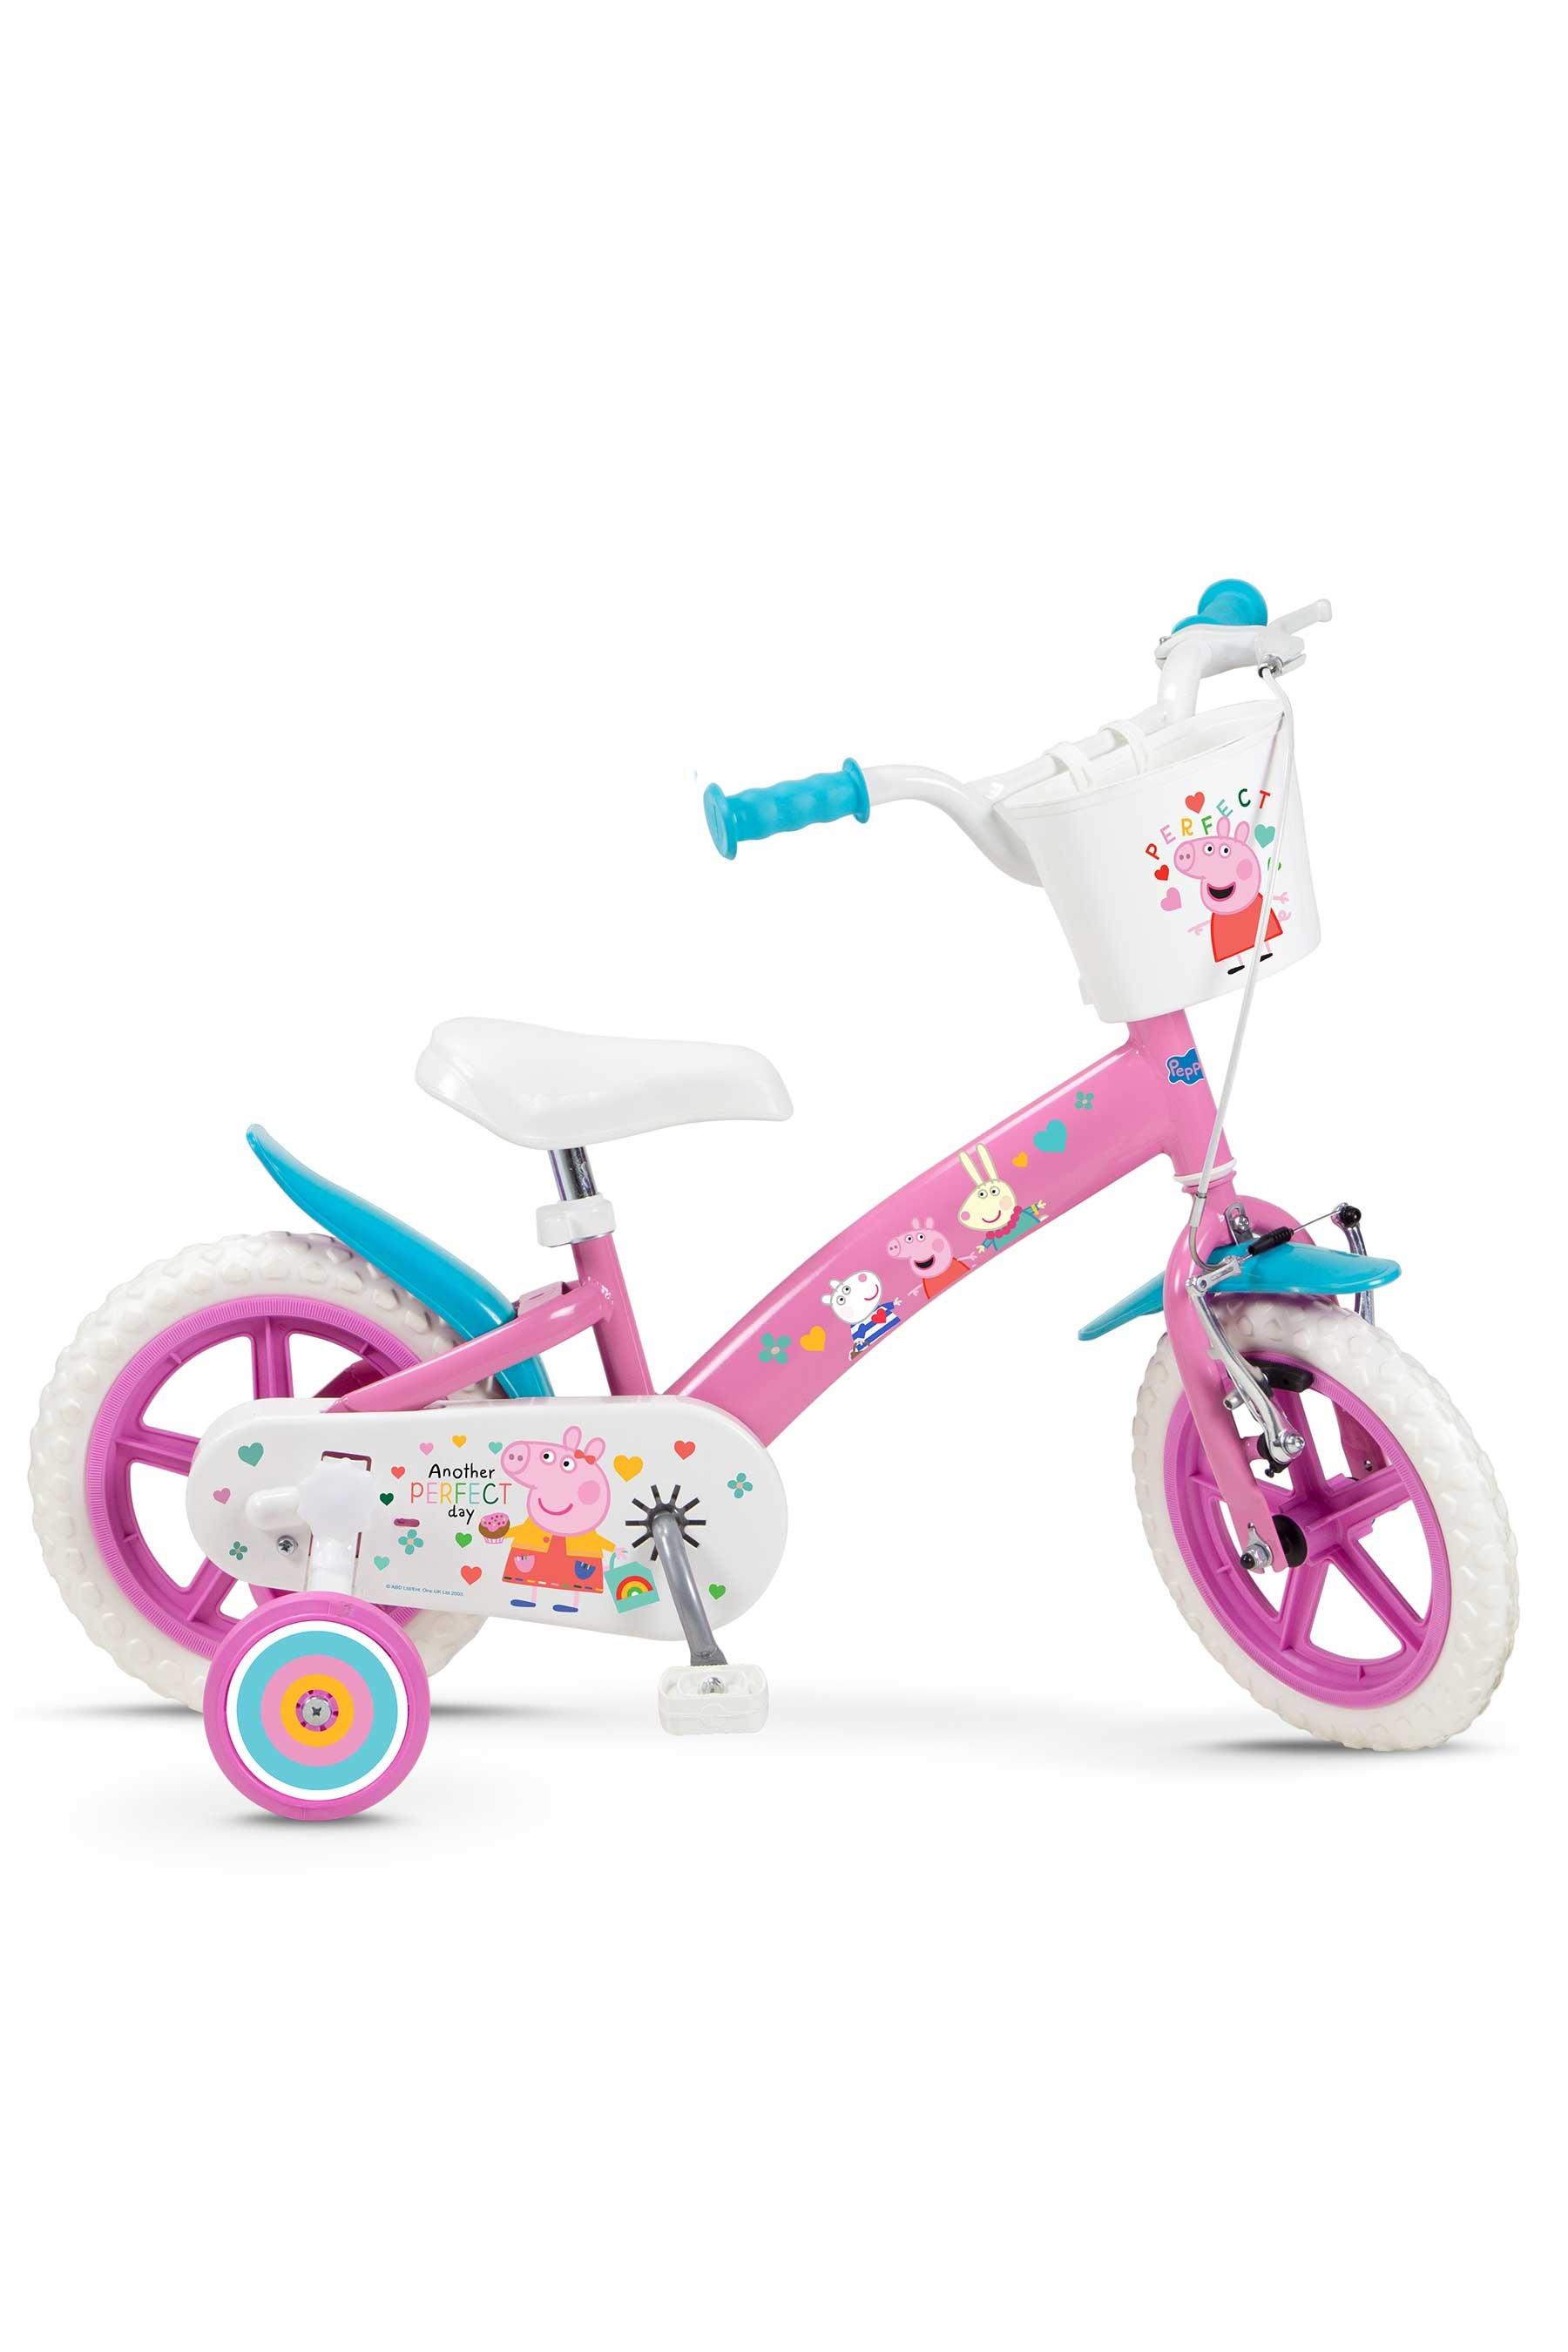 peppa pig bicycle - size: 12" - white